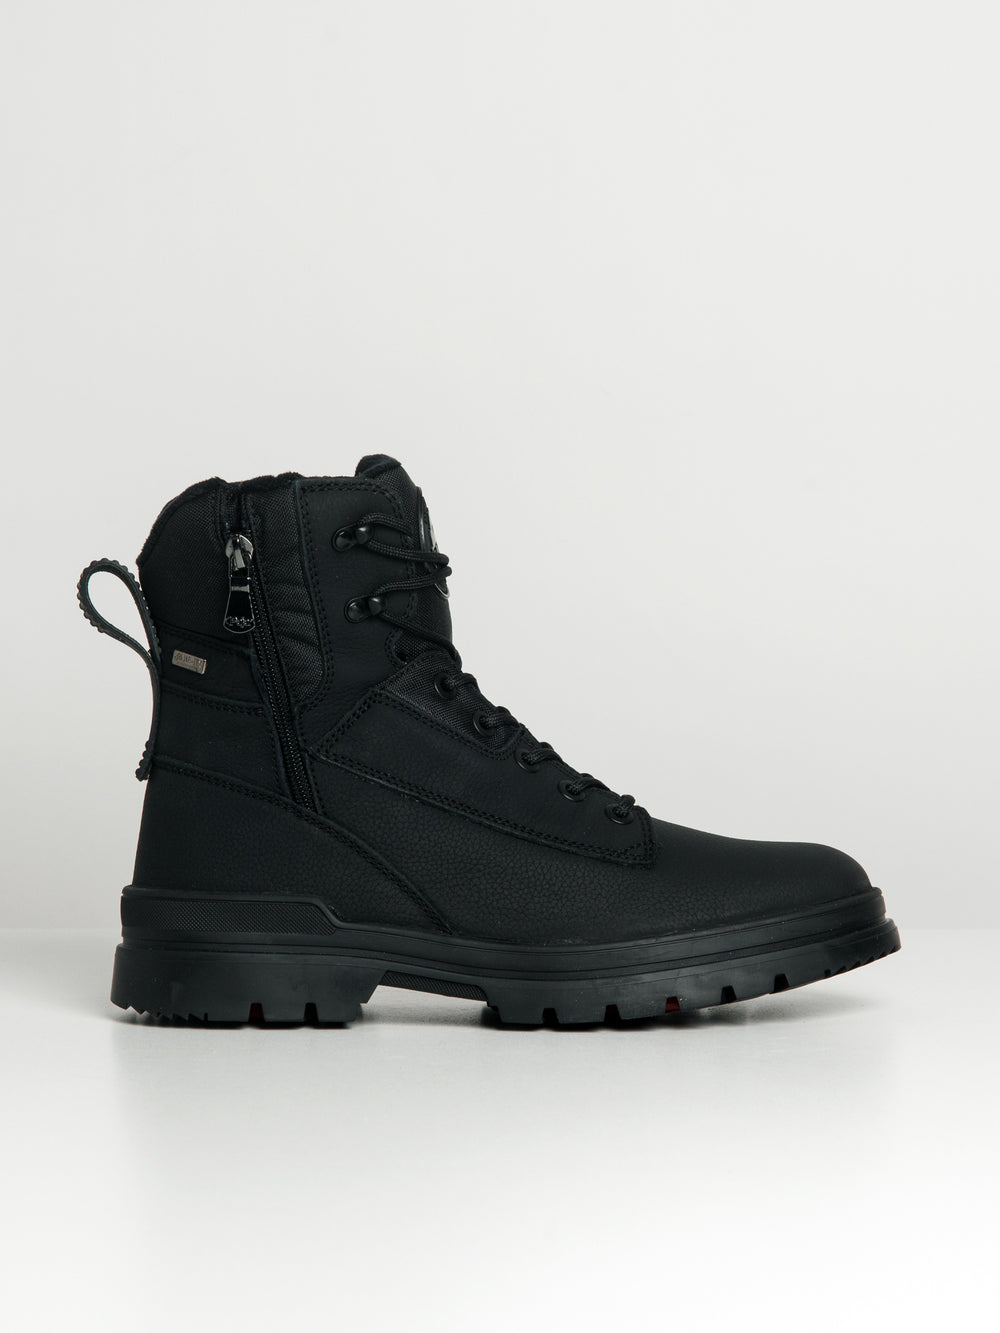 MENS PAJAR MADDOX BOOT | Boathouse Footwear Collective